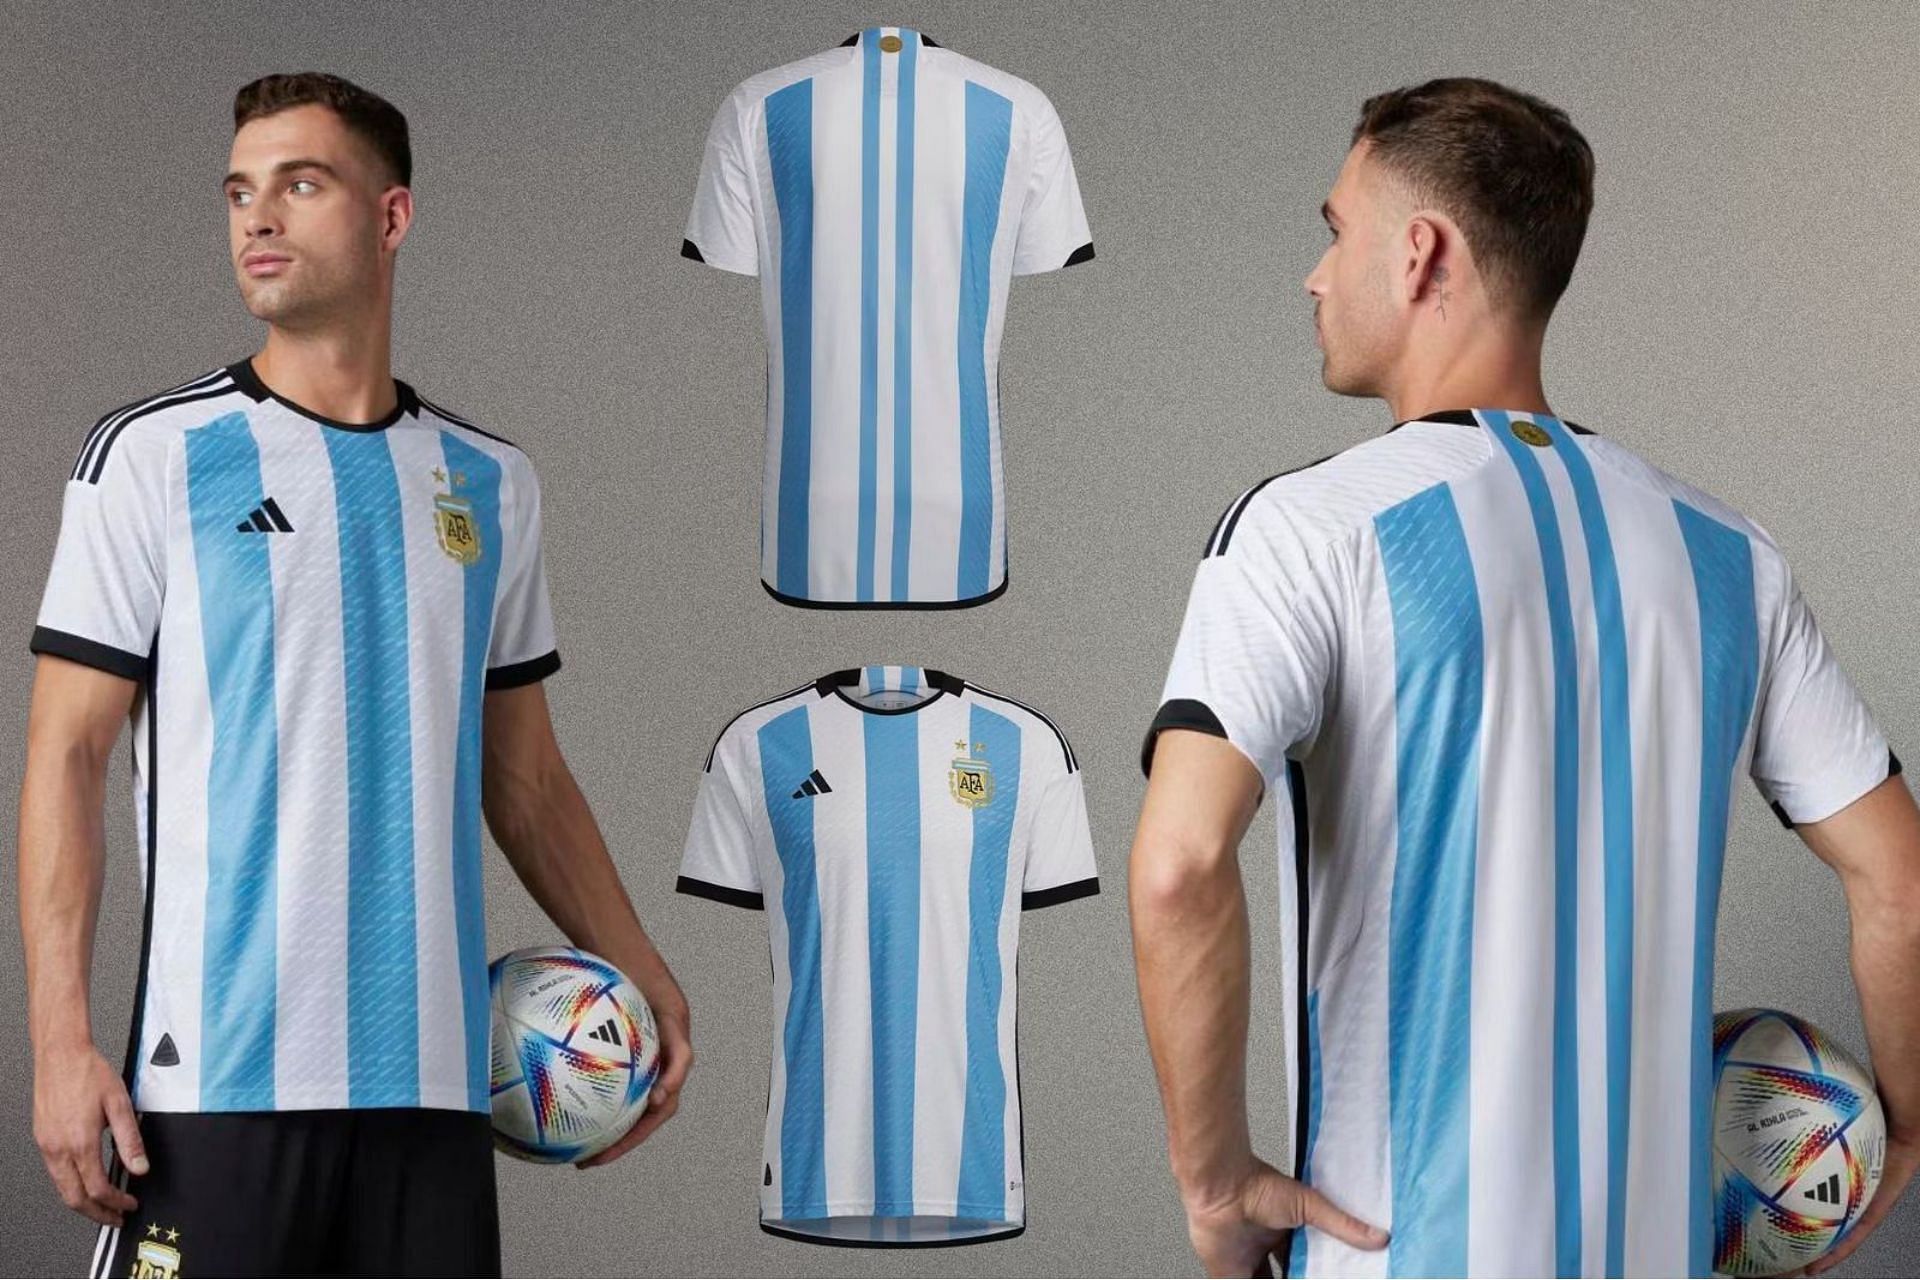 ARGENTINA 2014 WORLD CUP FINALS AUTHENTIC ADIDAS JERSEY HOME SHIRT